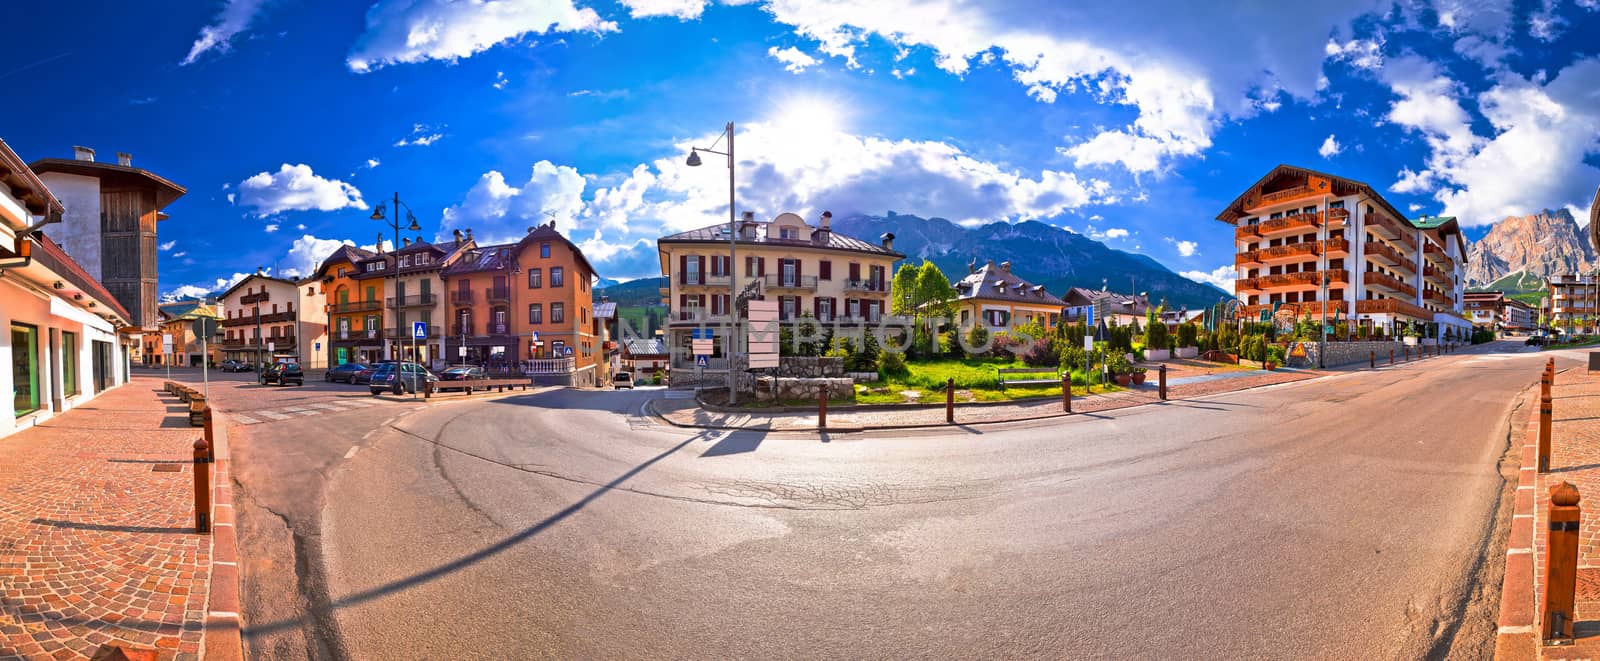 Cortina D' Ampezzo street and Alps peaks panoramic view by xbrchx